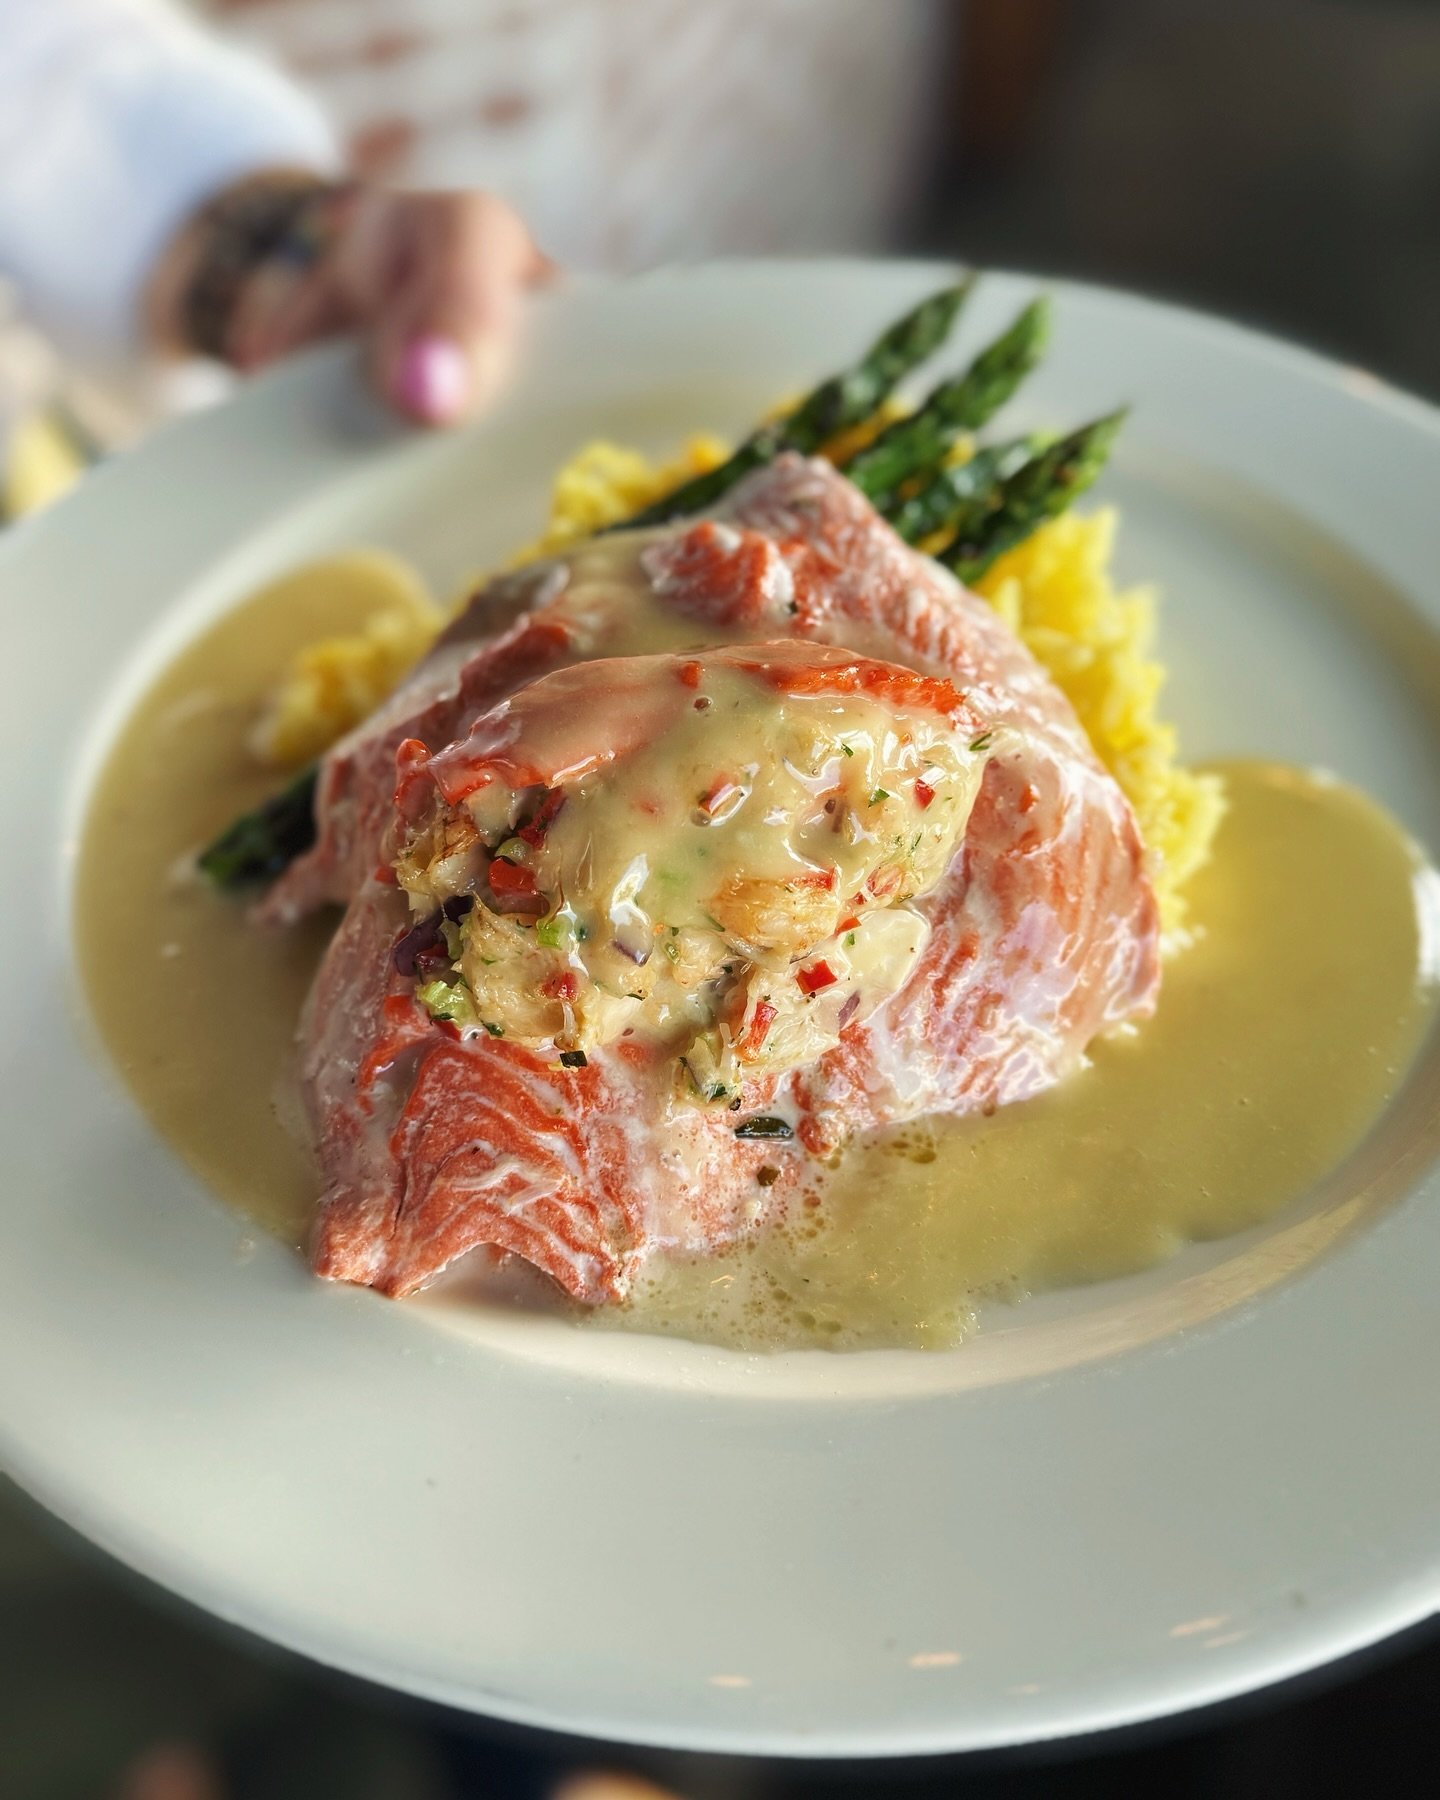 Salmon stuffed with shrimp, crab and brie with buerre blanc, finished in the brick oven 🔥 new to the menu this week!